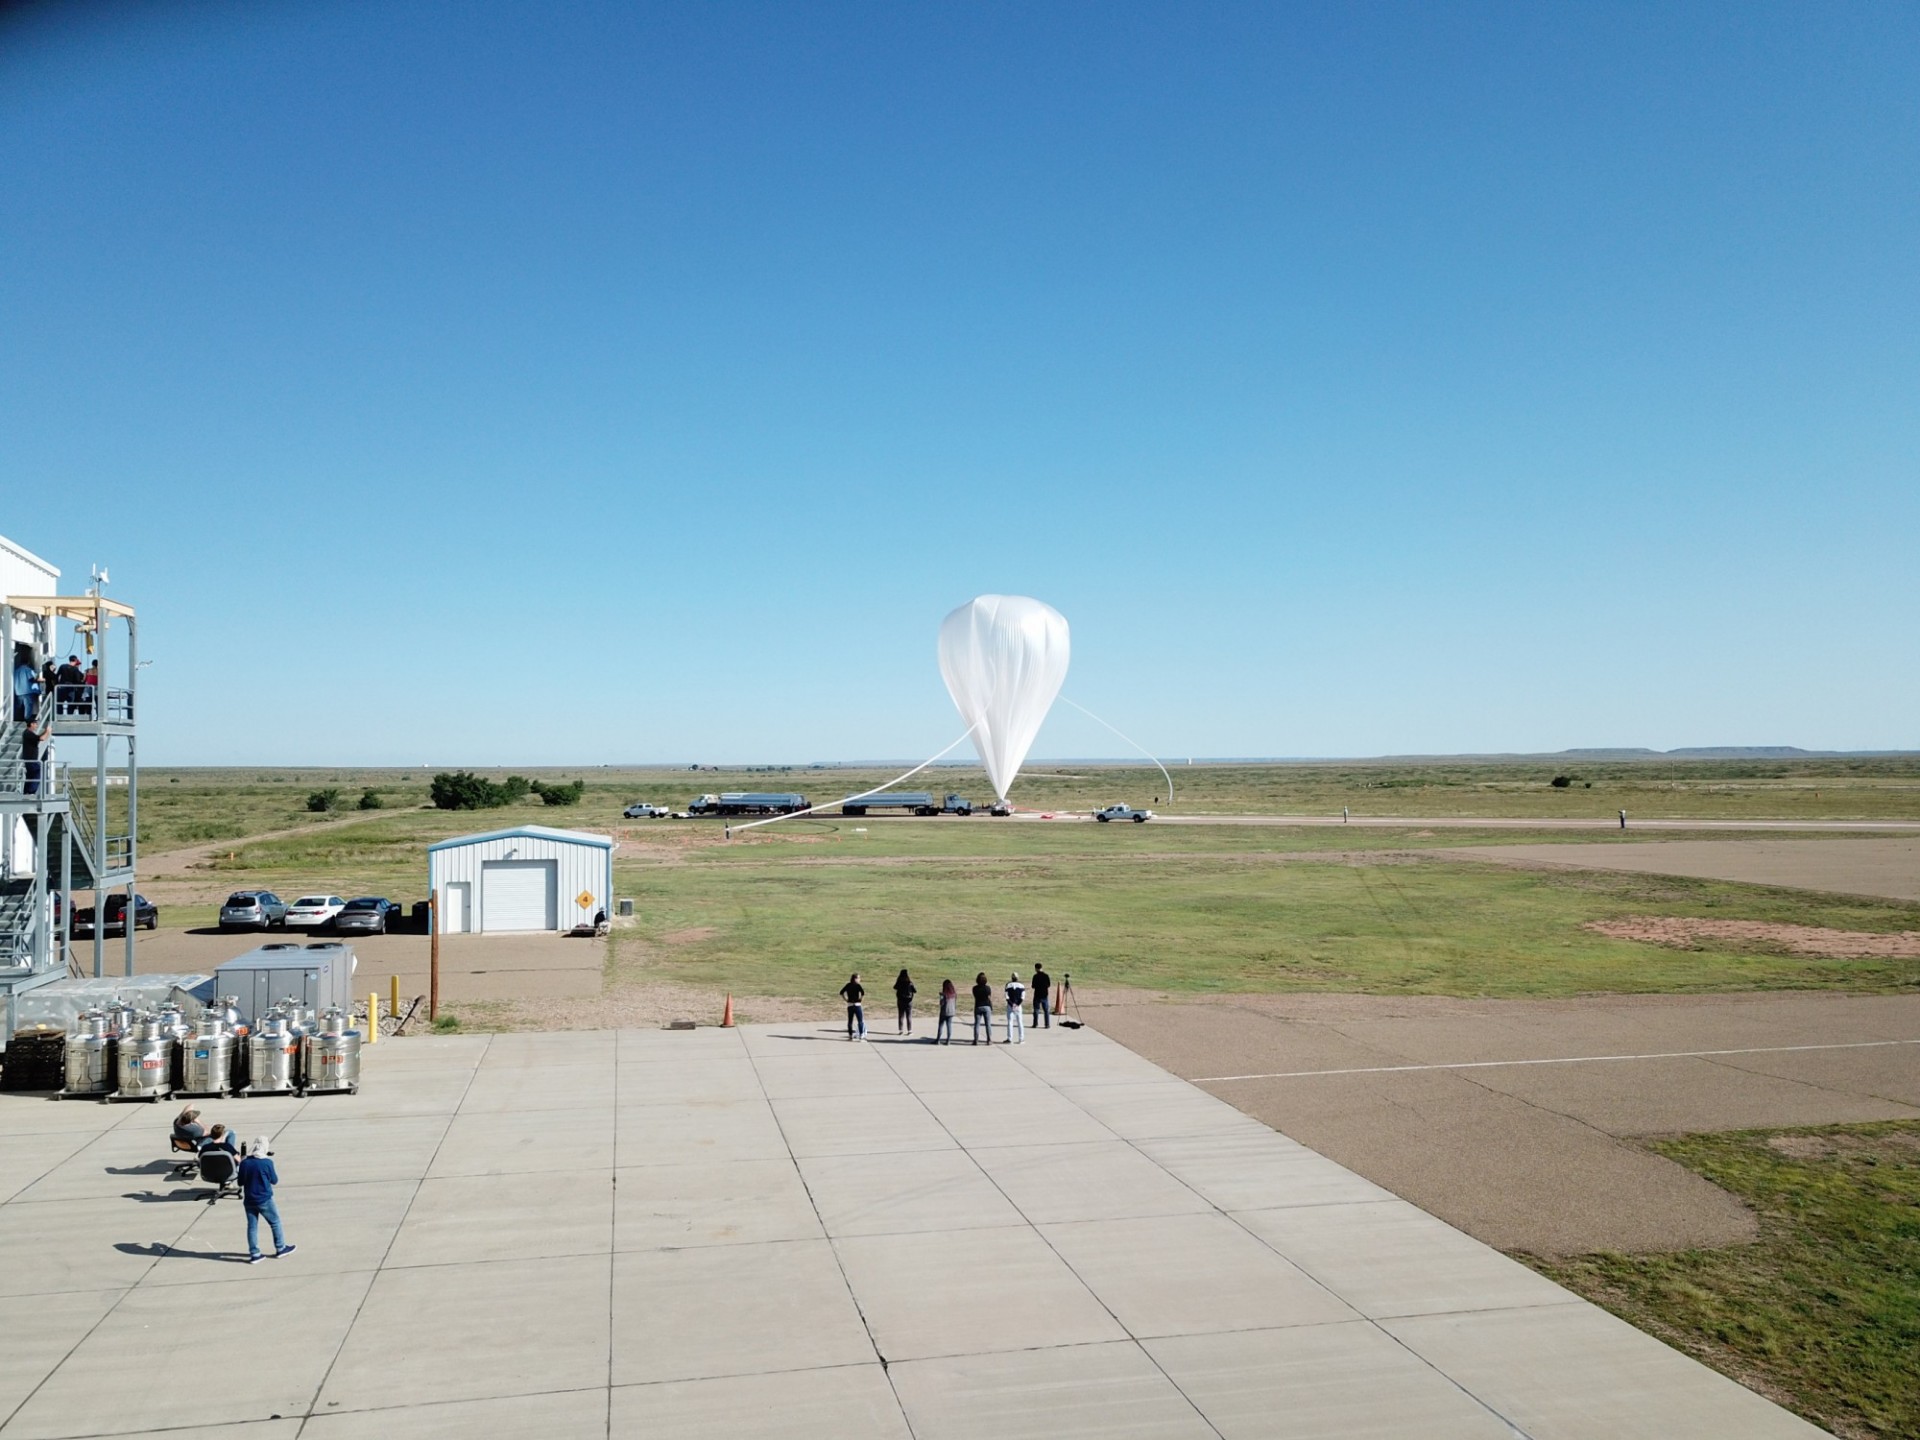 Photo of balloon on launch site prior to launching it in 2018.